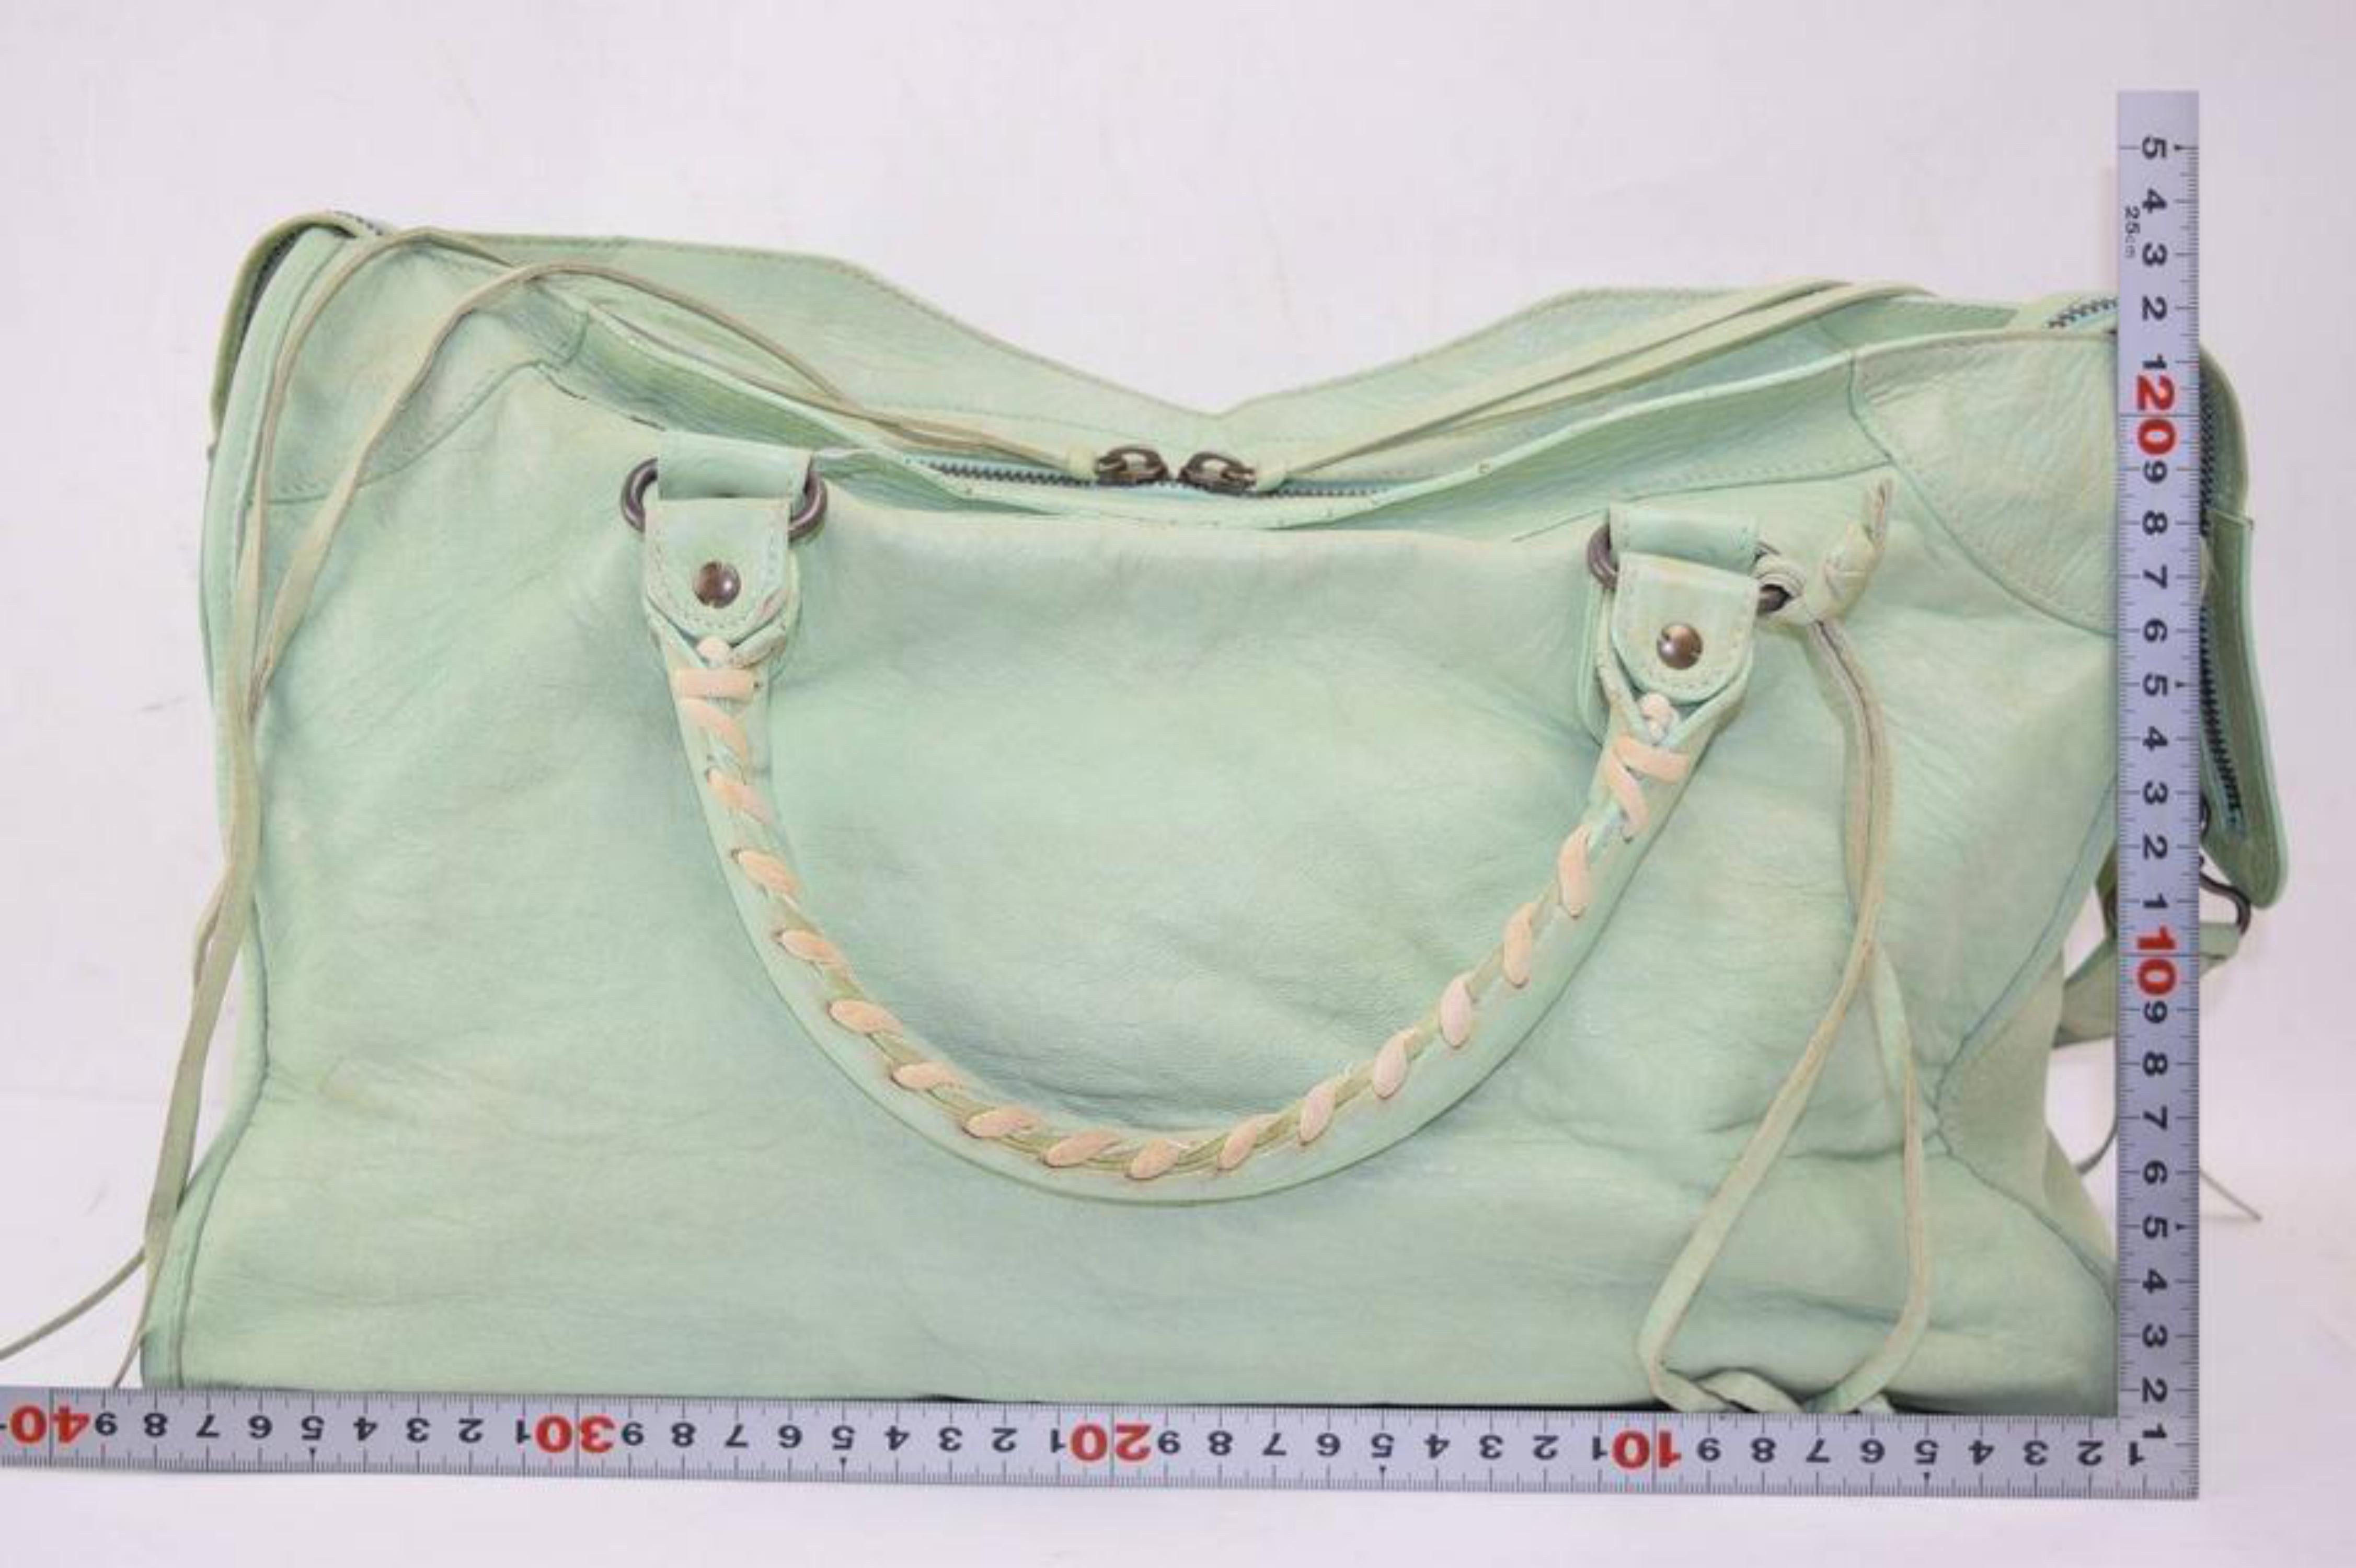 Gray Balenciaga Mint City 2way 869570 Green Leather Shoulder Bag For Sale